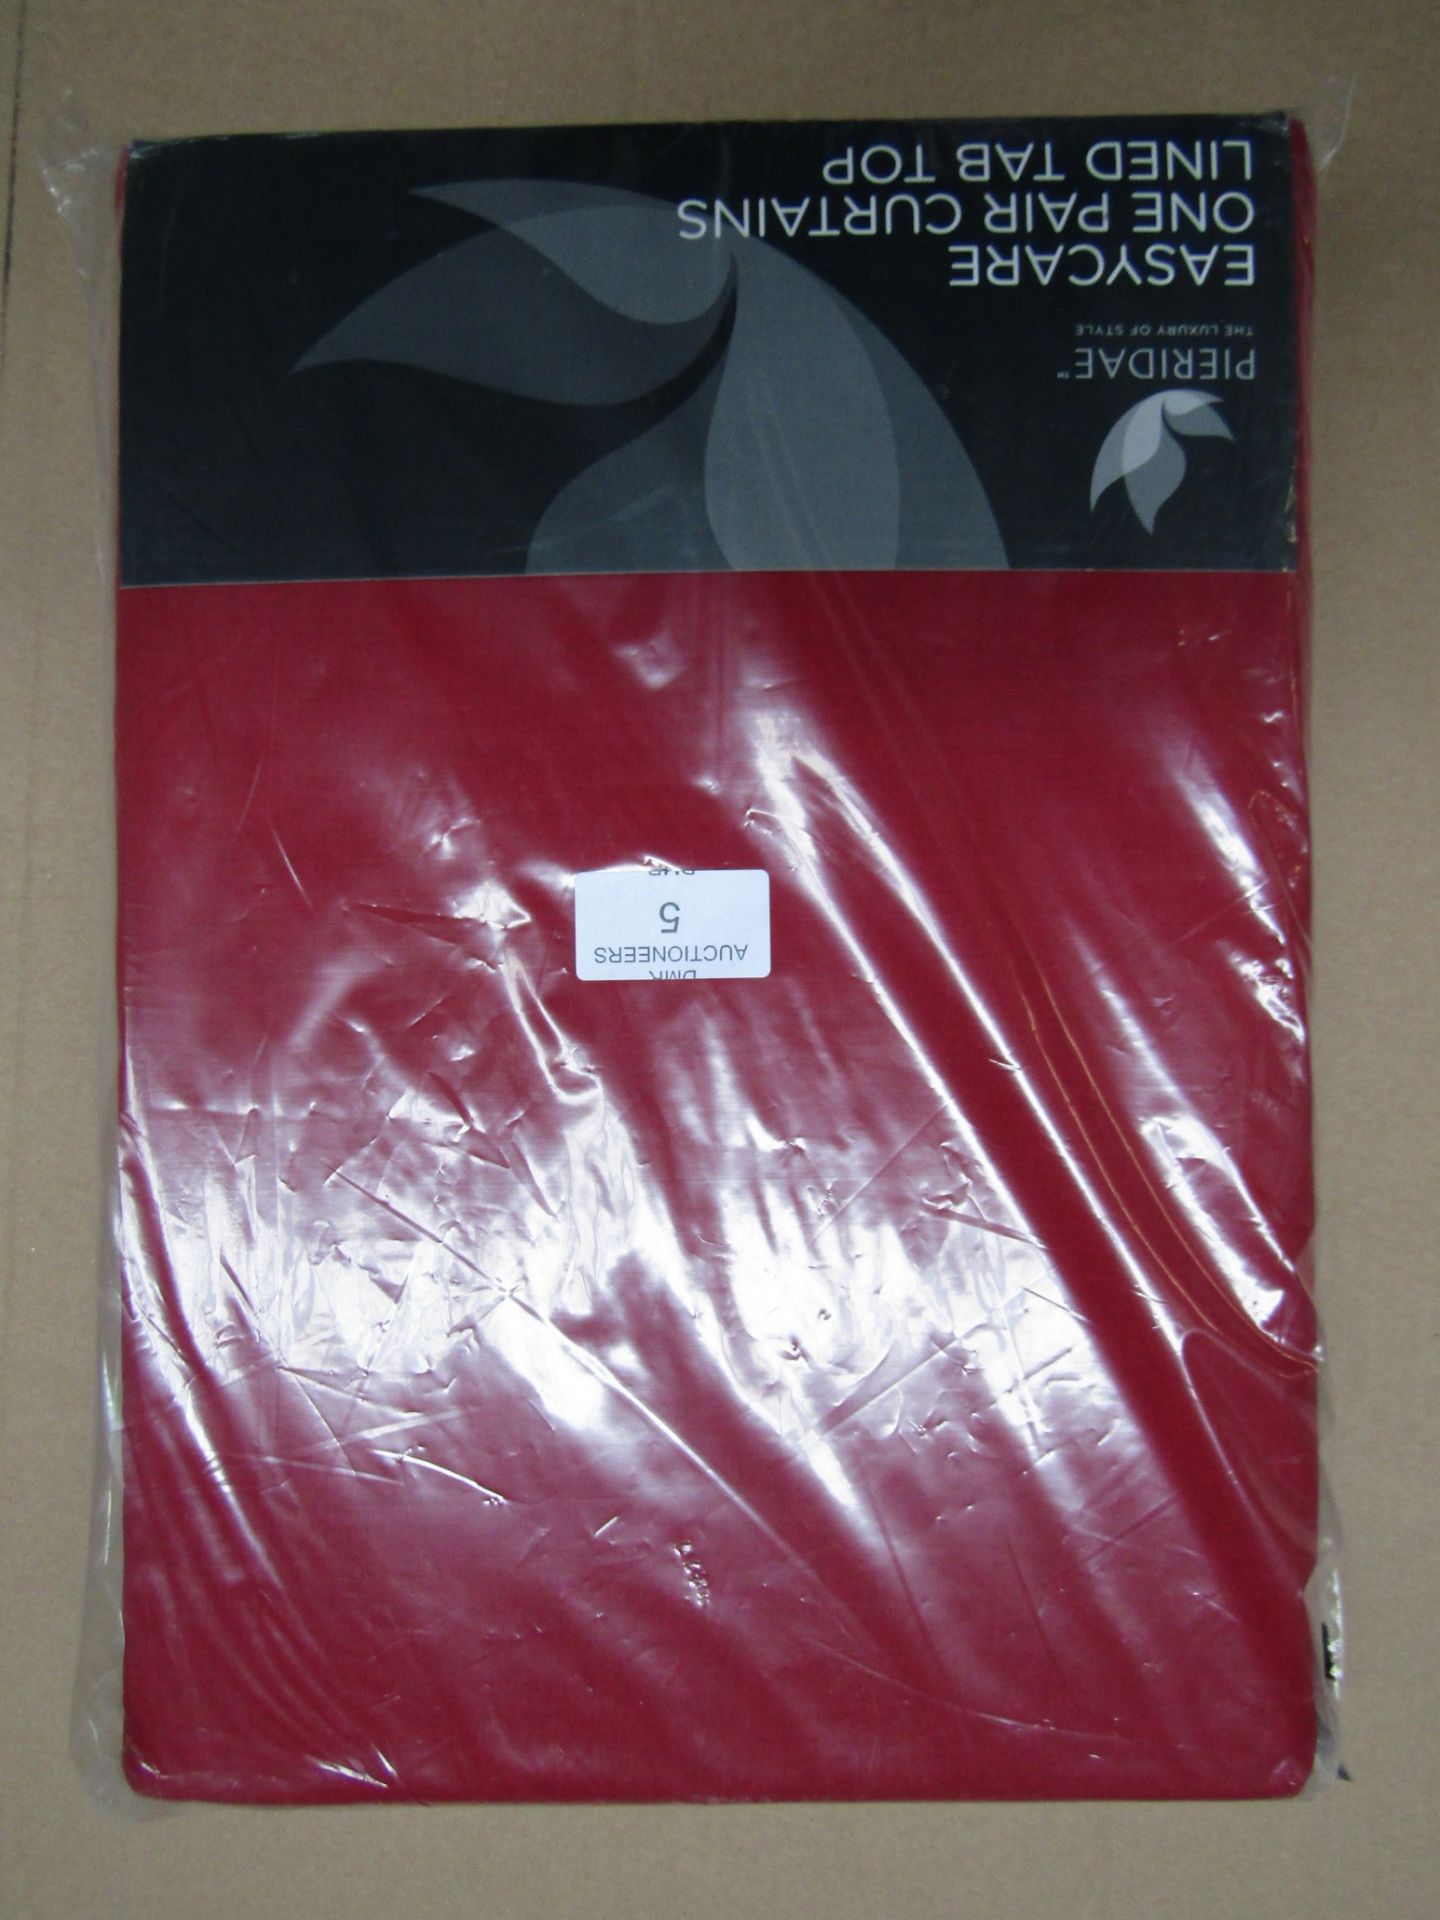 1 68 PICK TAB CURTAINS AND TIE BACKS 72" RRP £45.0